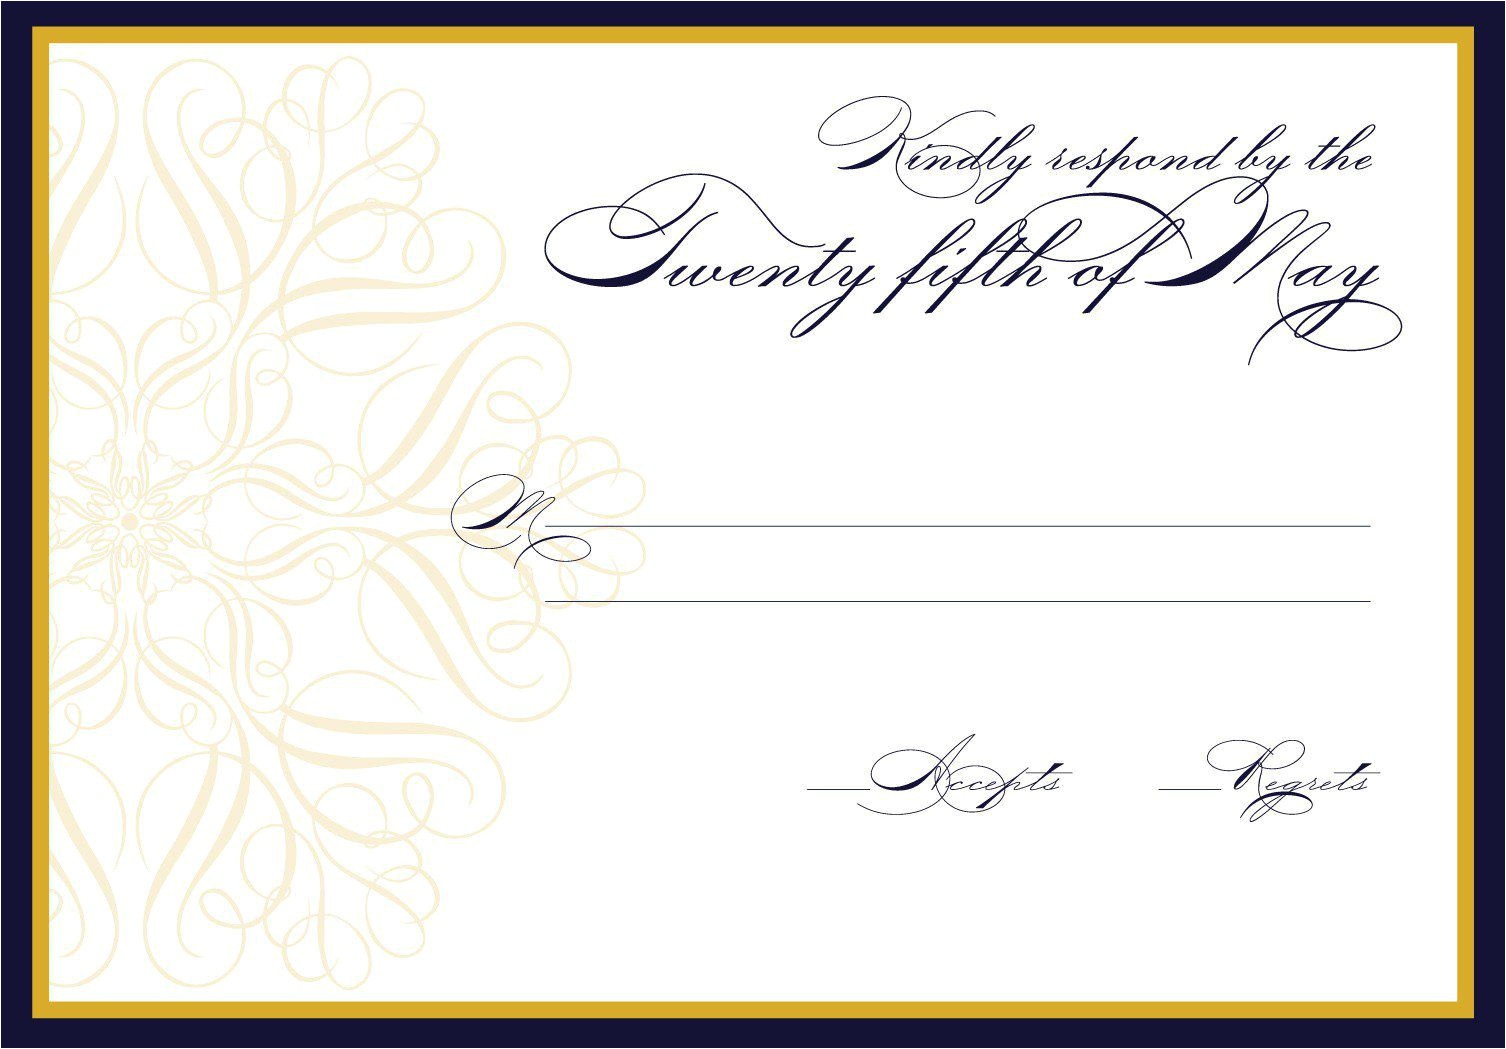 Party Invitation Reply Template event Invitation Wedding Invitations Reply Cards Card